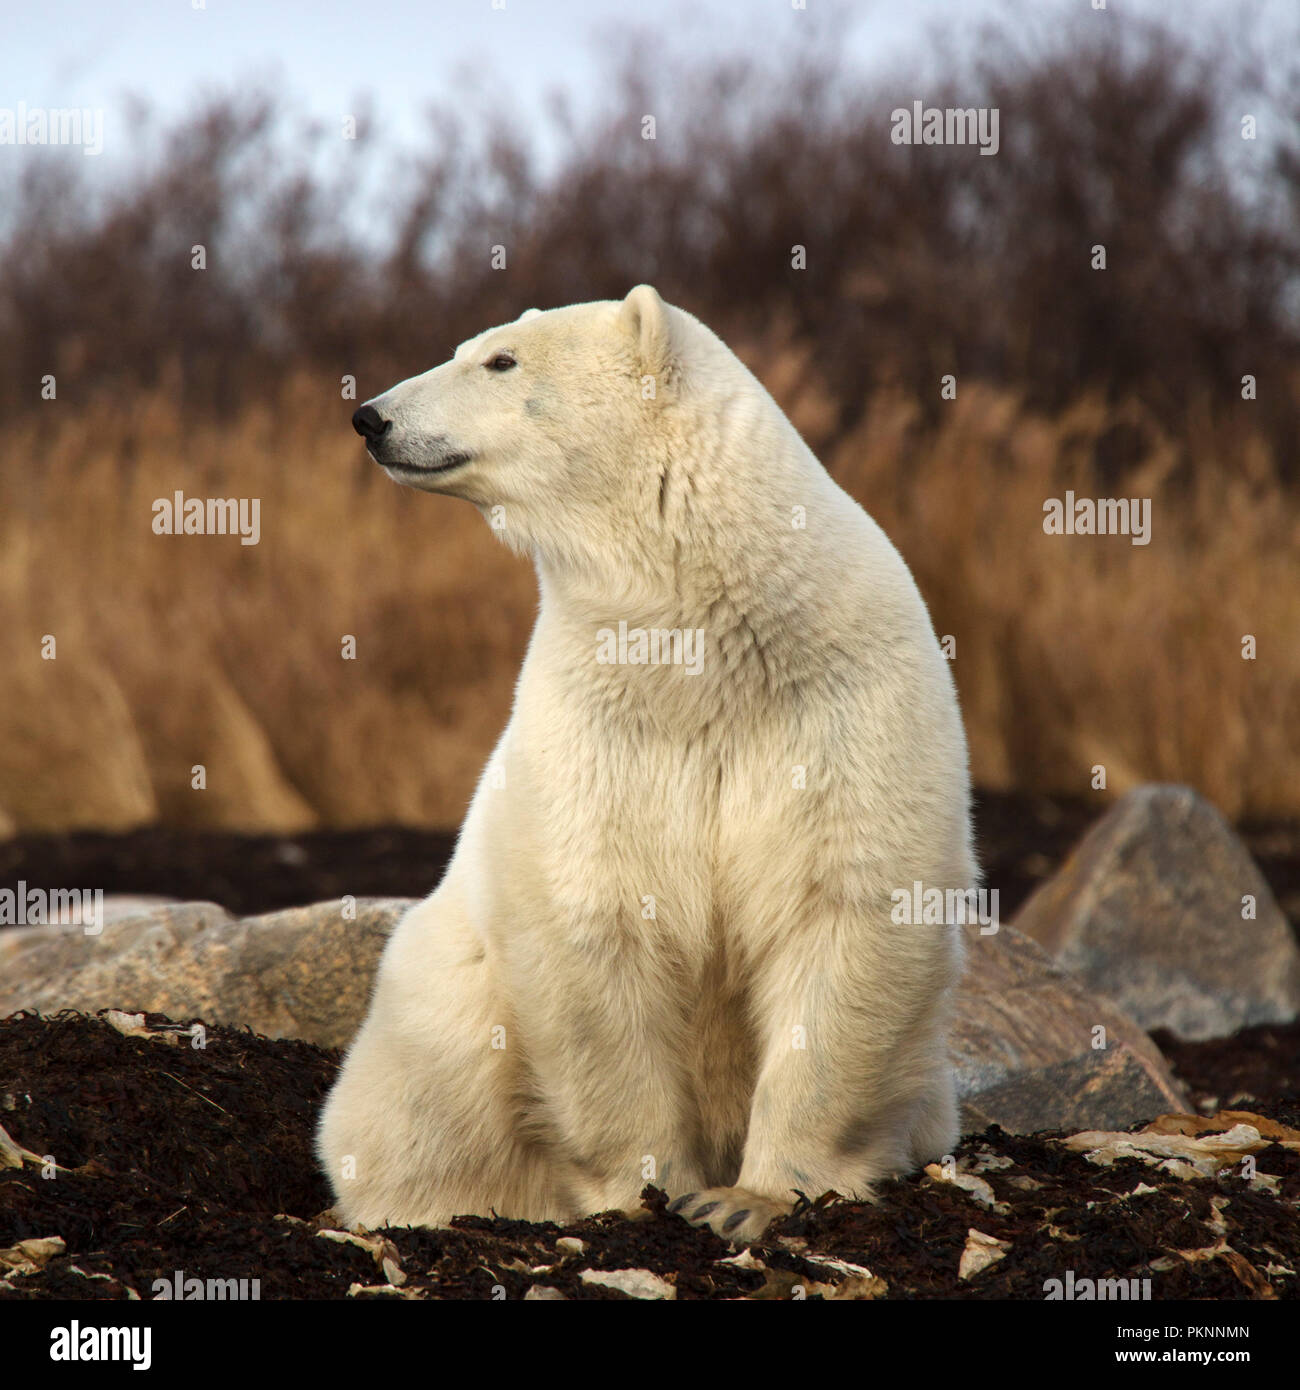 A polar bear (Ursus maritimus) in long grass by the Hudson Bay in Manitoba, Canada. The bear sits on kelp that has washed onto the shore. Stock Photo